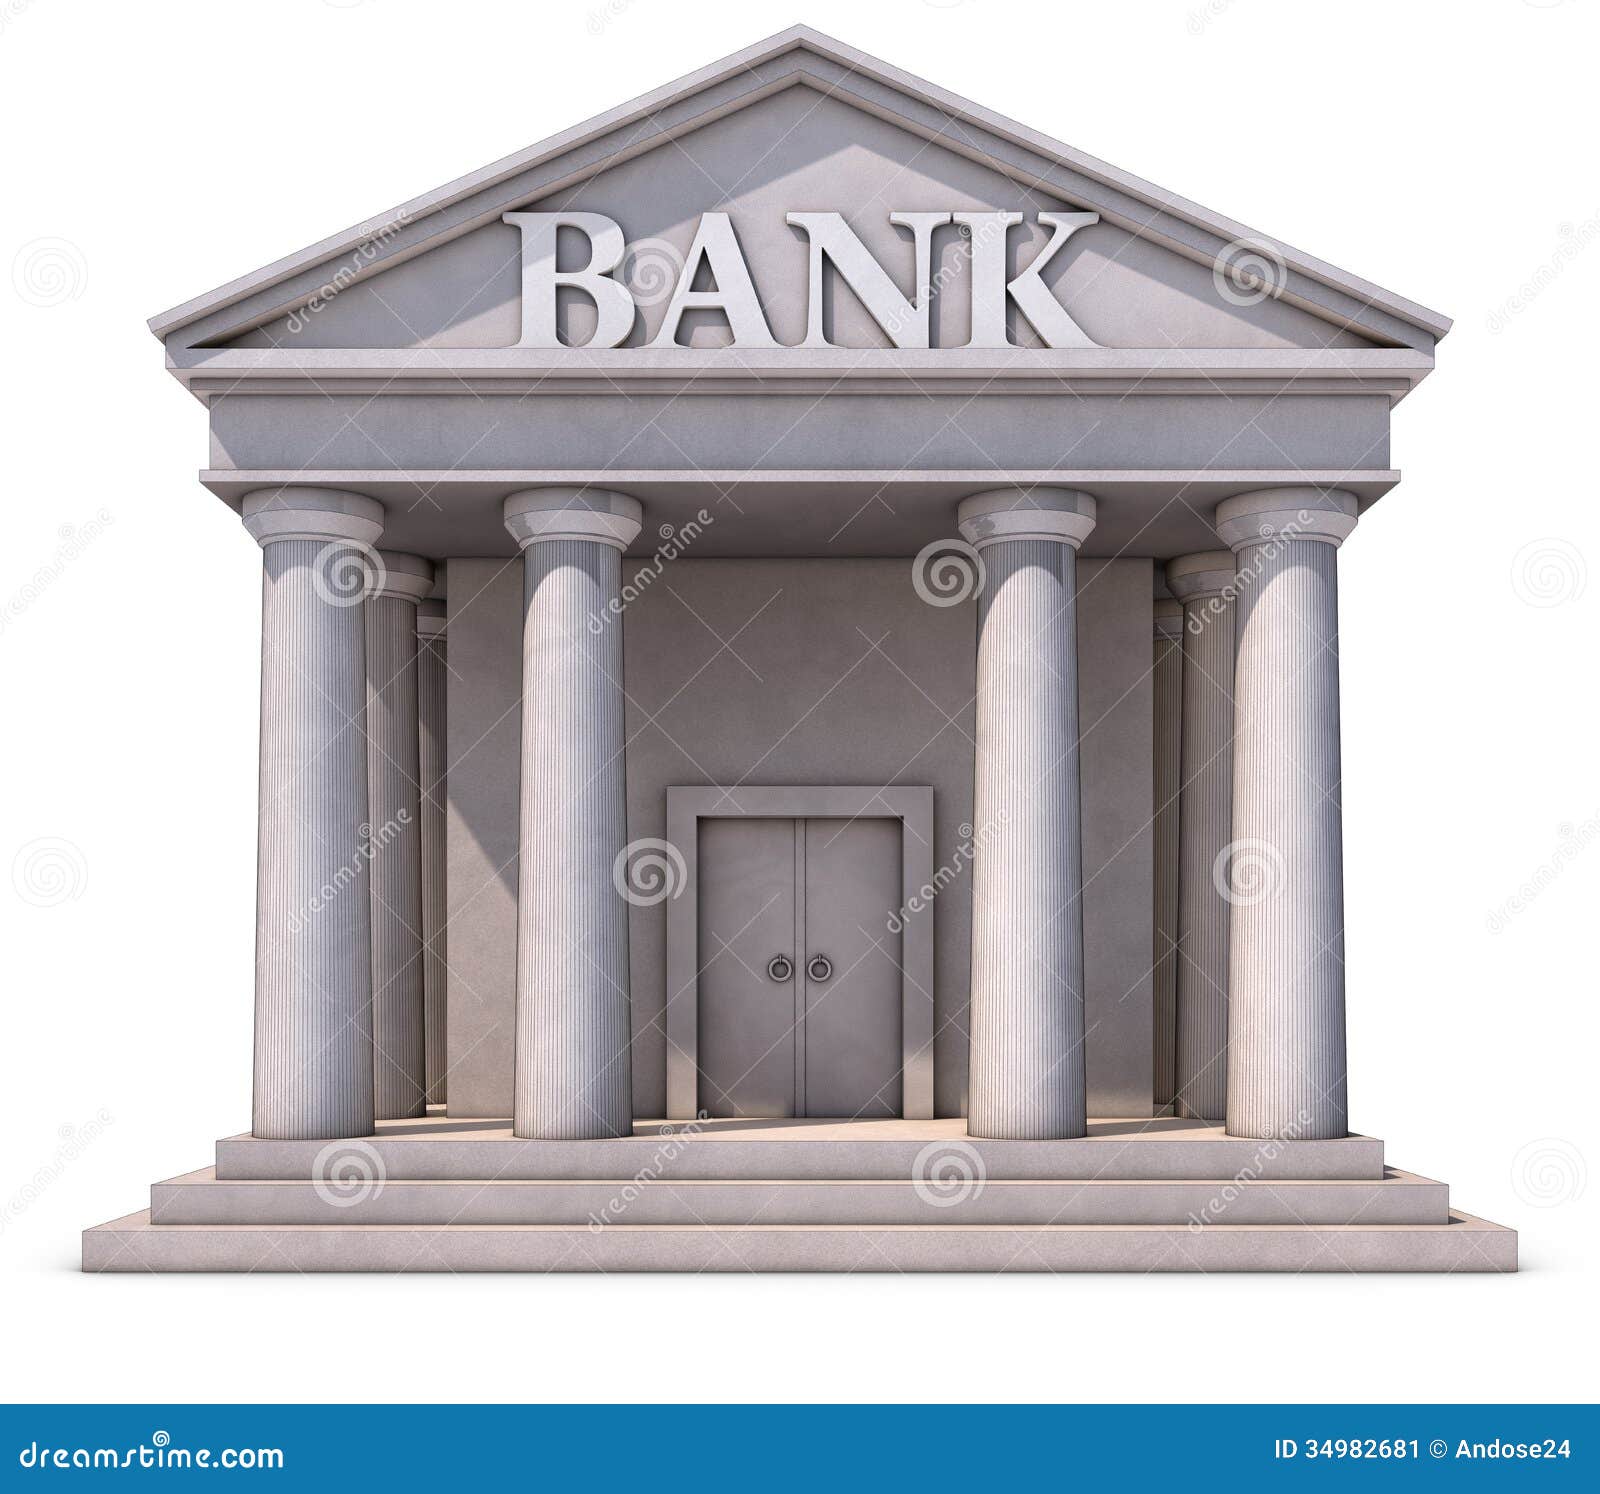 clipart of bank - photo #39